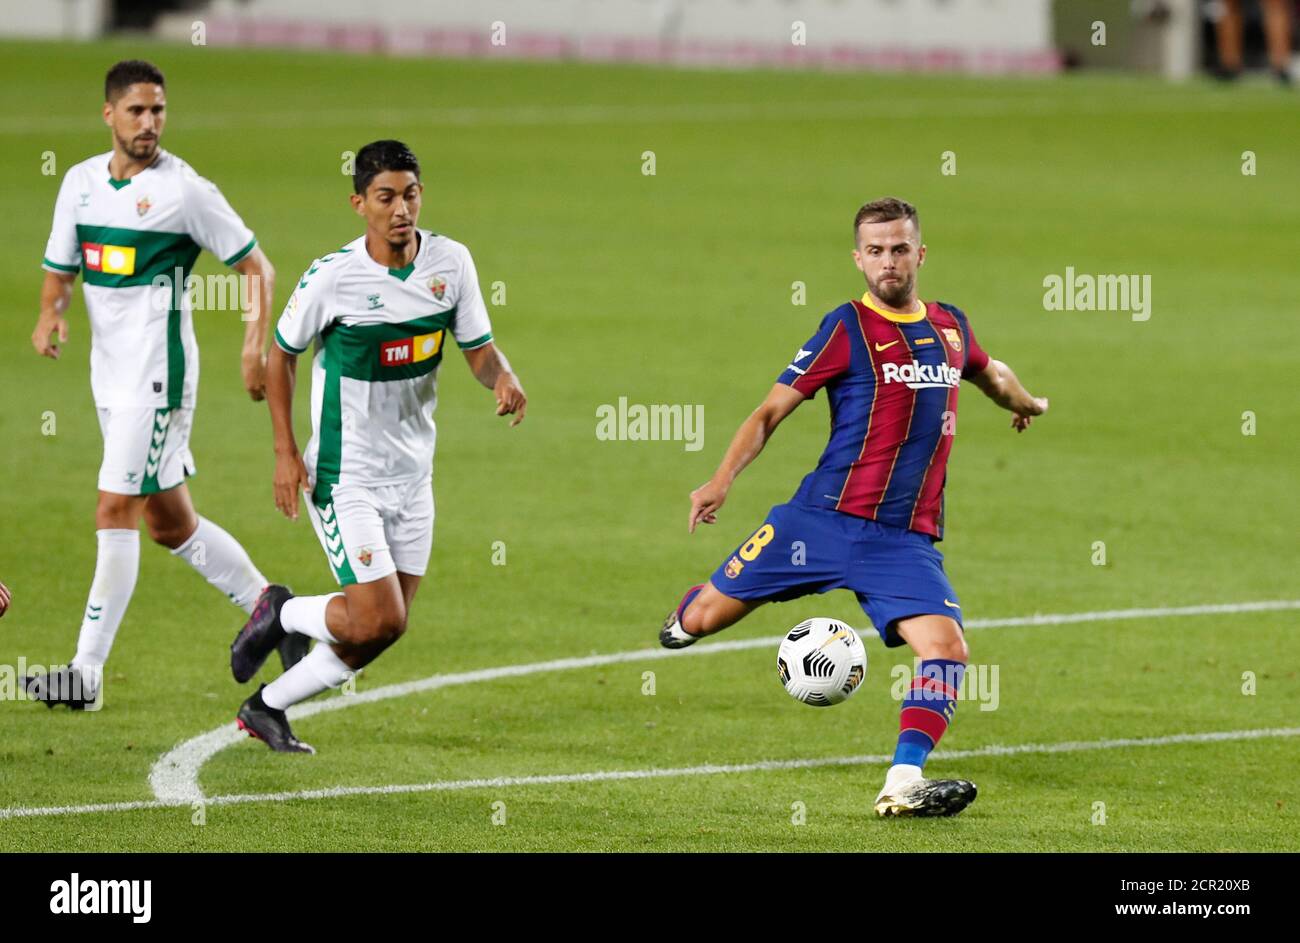 Barcelona, Barcelona, Spain. 19th Sep, 2020. Pjanic of FC Barcelona in action during the Gamper Trophy match between FC Barcelona and Elche at Camp Nou on September 19, 2020 in Barcelona, Spain. Credit: David Ramirez/DAX/ZUMA Wire/Alamy Live News Stock Photo